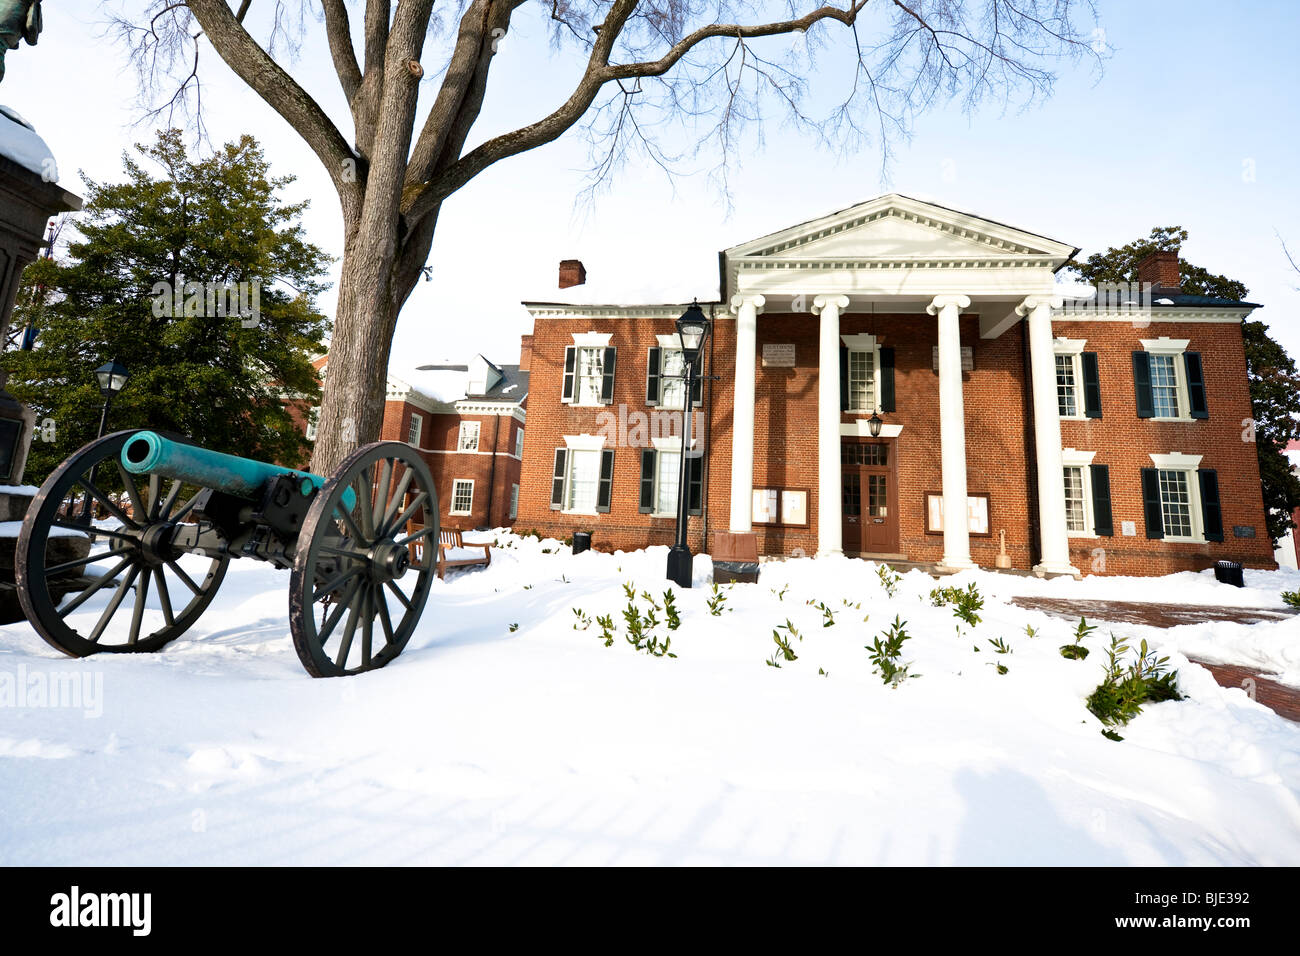 The Charlottesville Courthouse in winter with snow on the front lawn Stock Photo